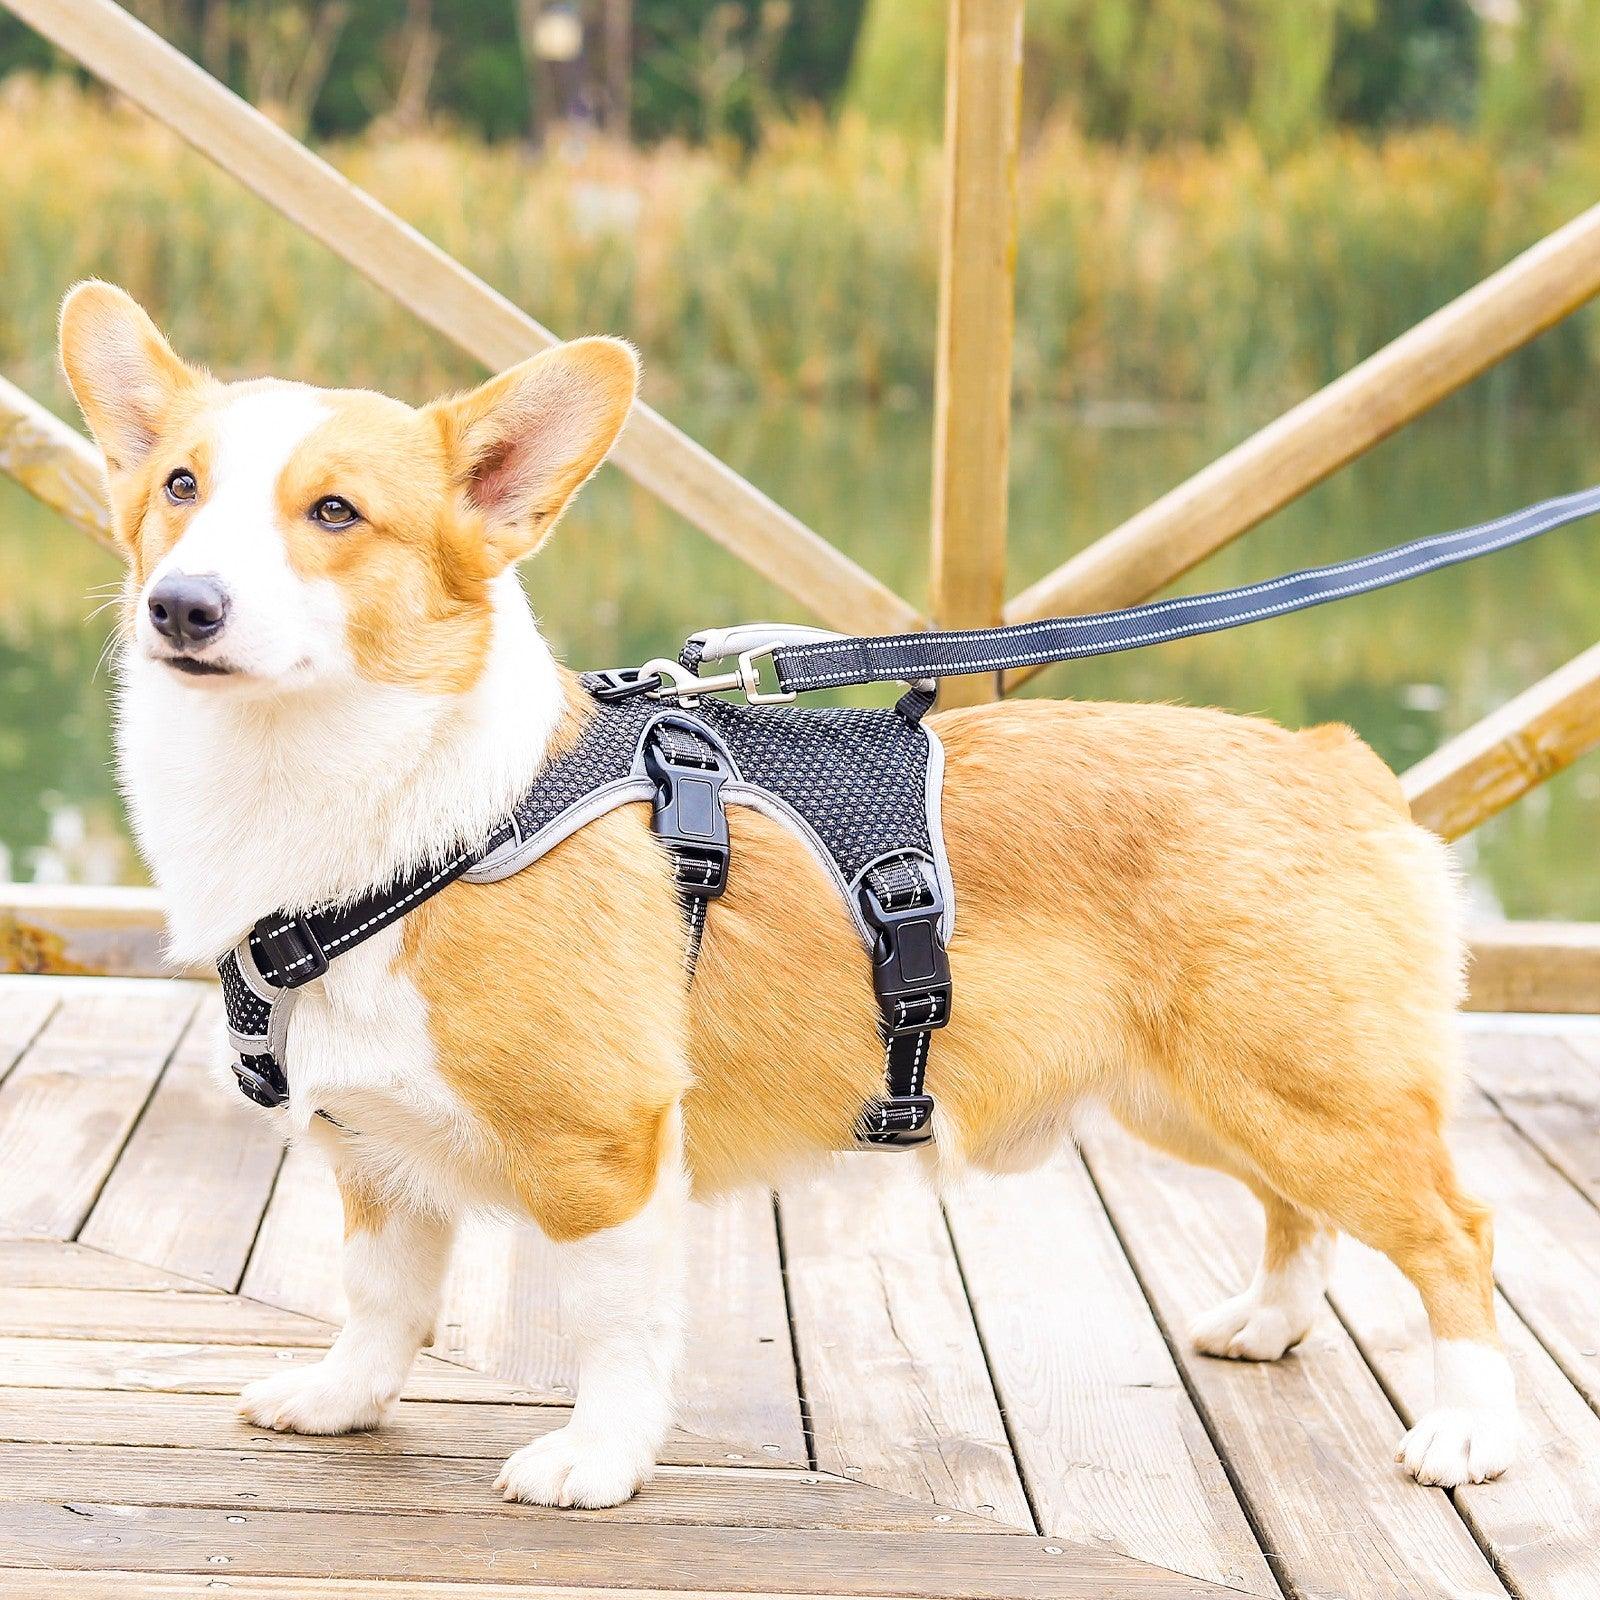 Corgi standing wearing black escape proof harness with leash